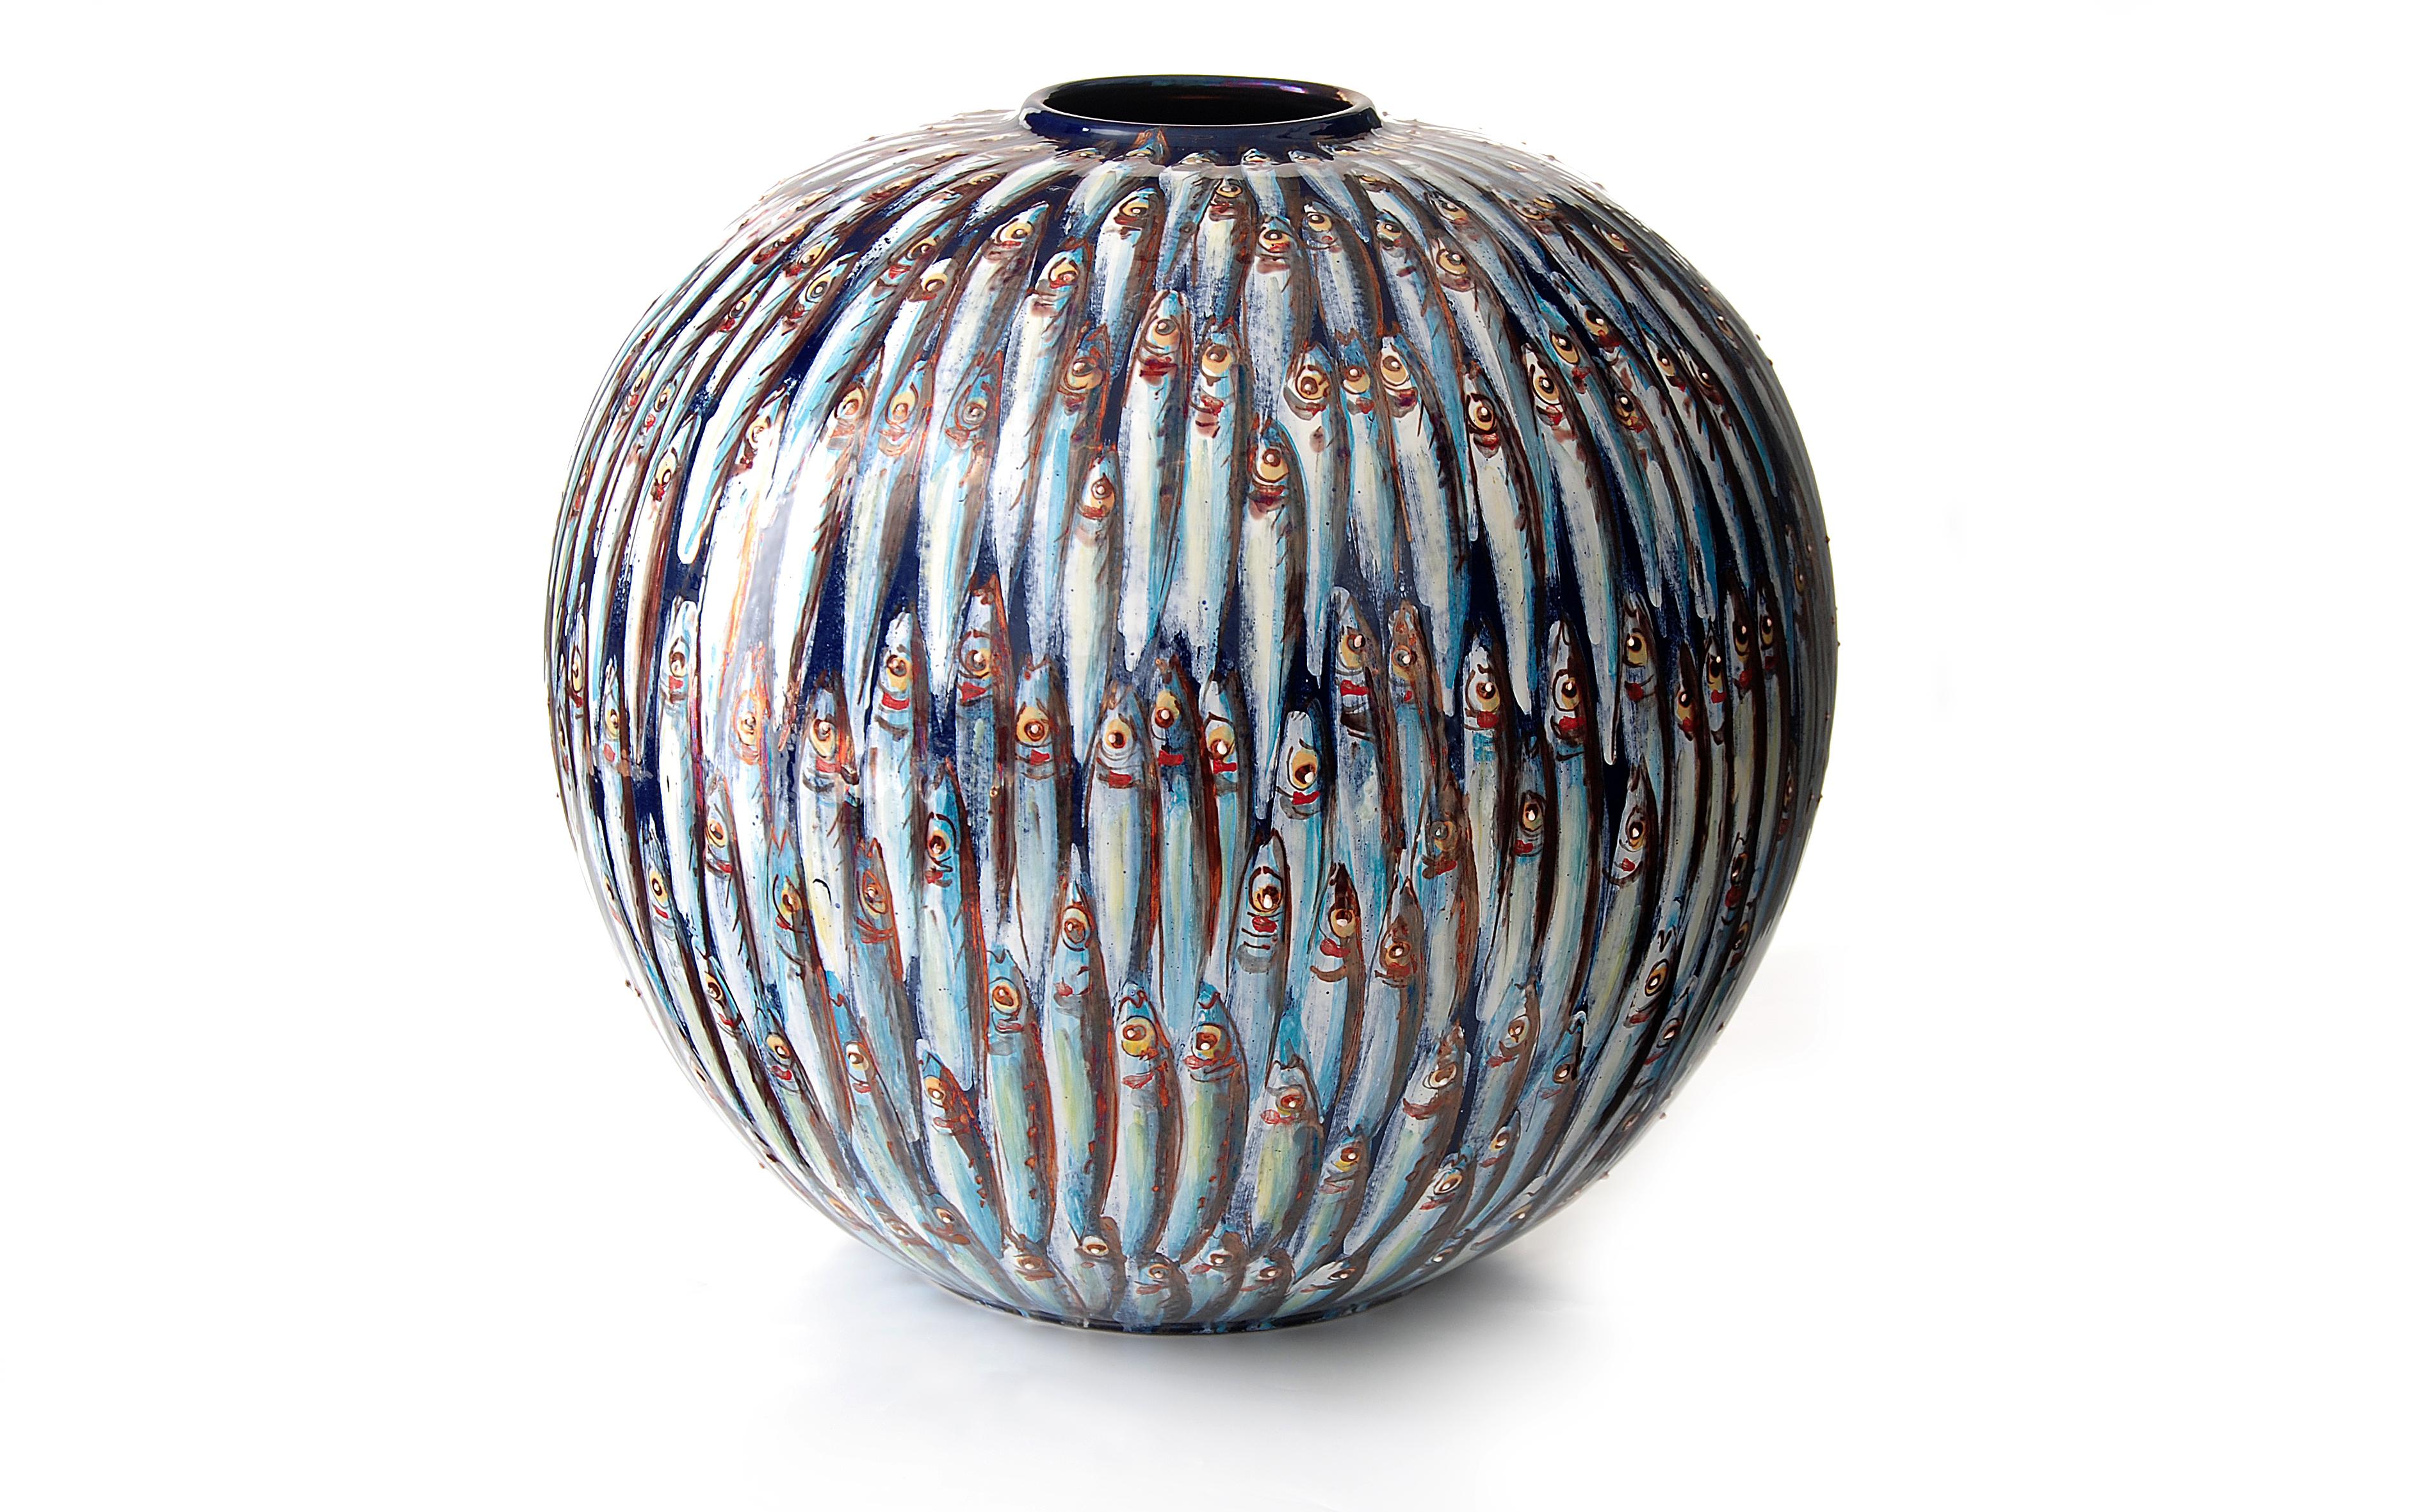 Mediterranea moon jar, 2020, full-fire reduction faience earthenware 30 cm diameter, hand painted unique piece.
Available 30cm and 25cm diameter: the price of this items refers to the 30cm one. 

Bottega Vignoli is a brand of artistic ceramics